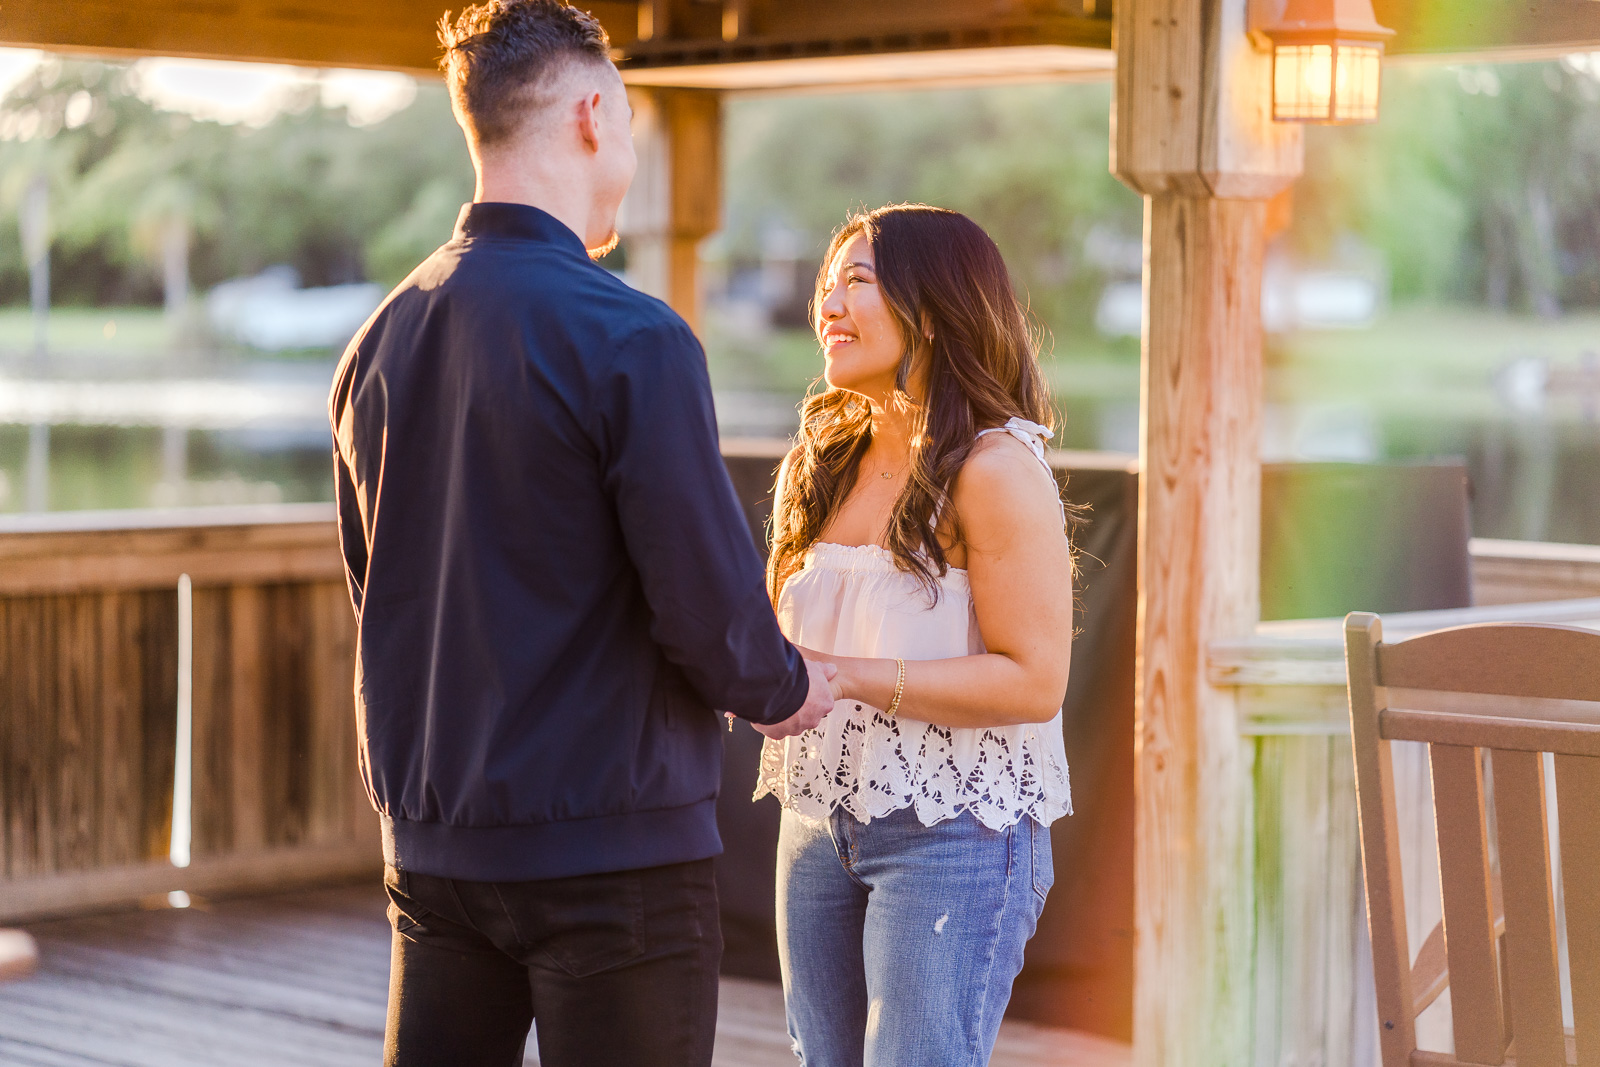 Proposal videographer in Orlando captures engagement at Enzo's on the Lake restaurant